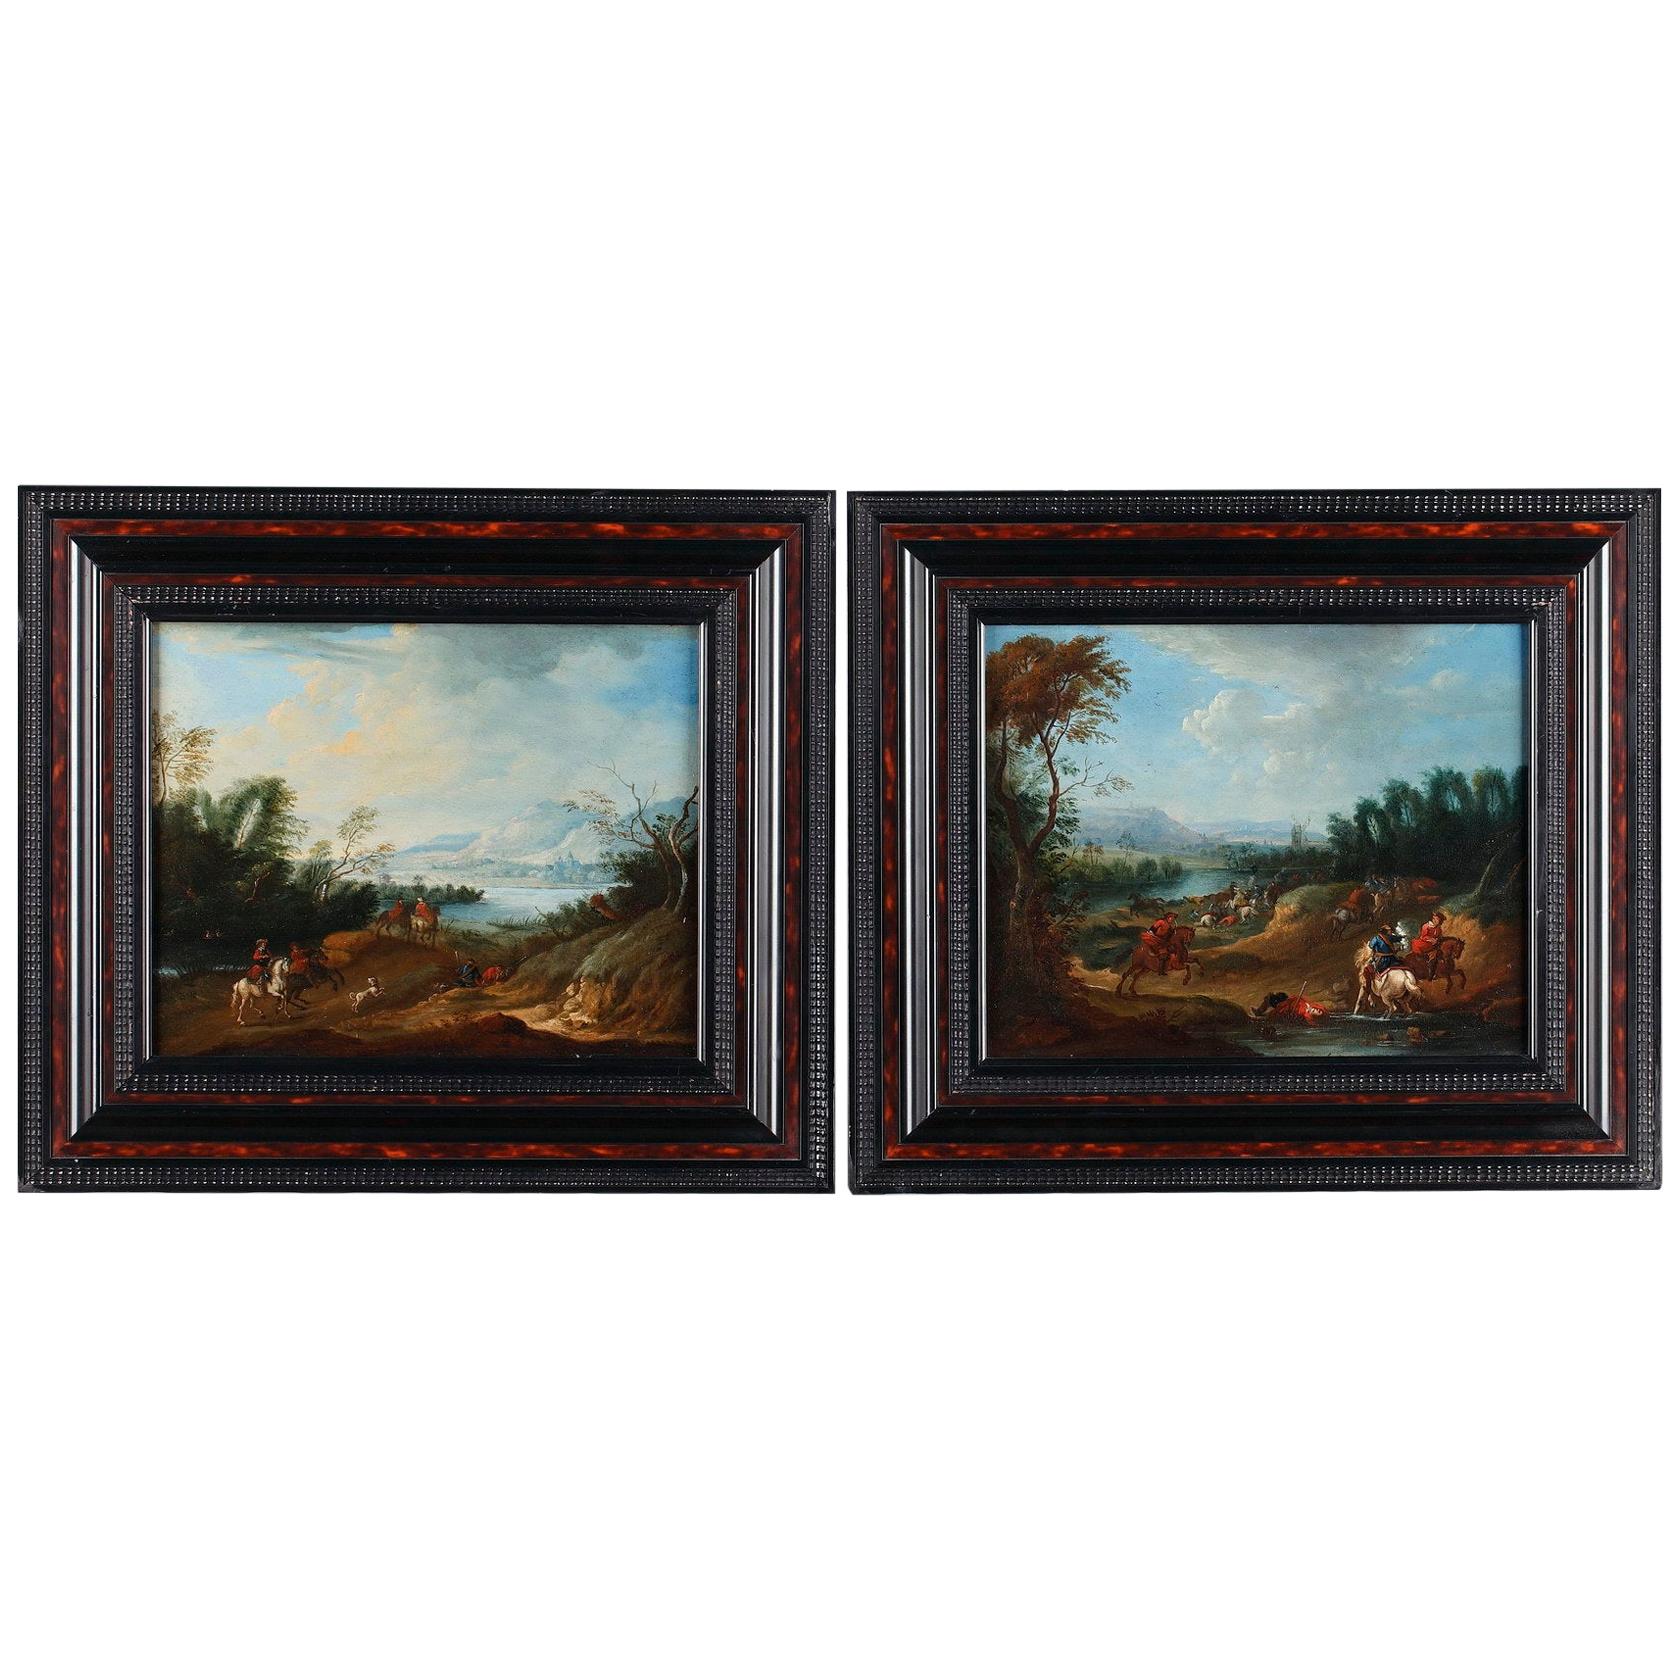 Two Landscapes Attributed to Elias Martin